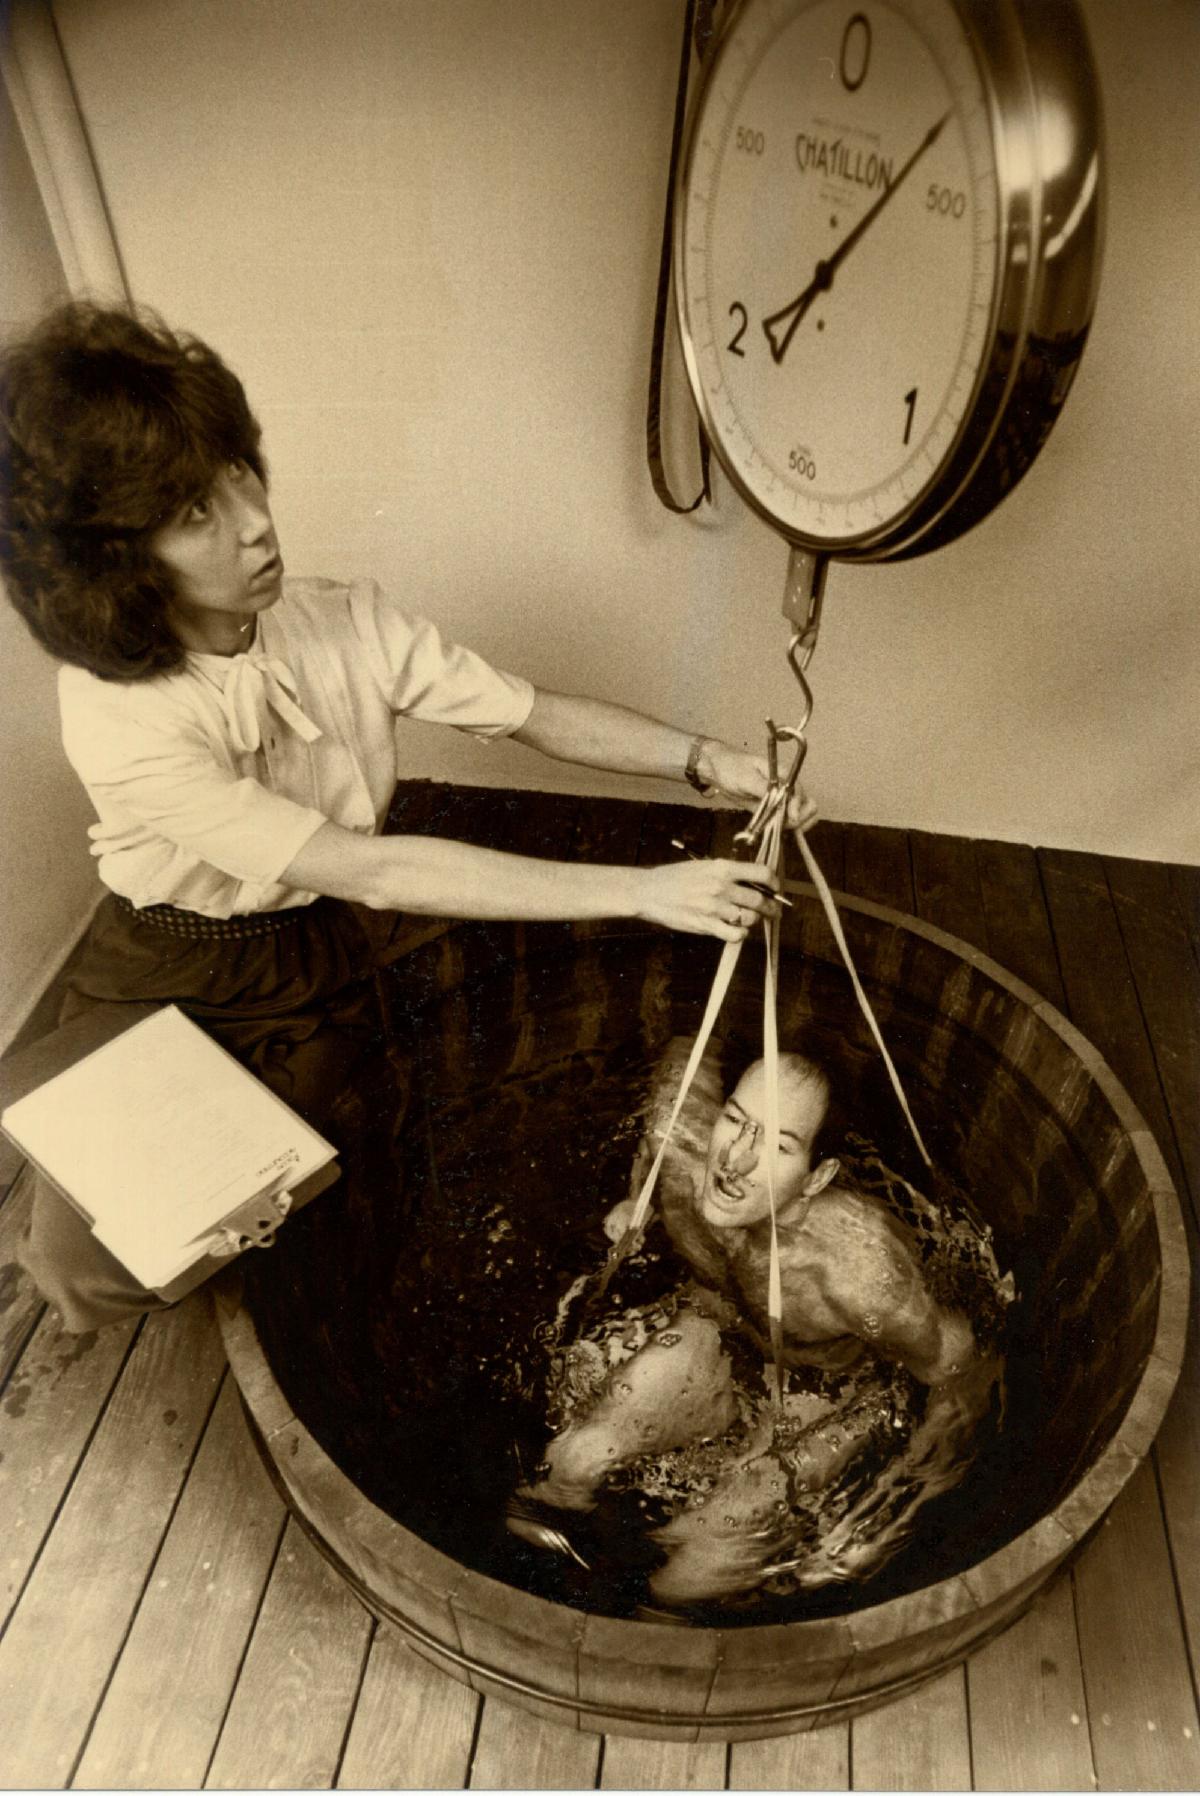 Joe Dillon being hydrostatically weighed, 1982